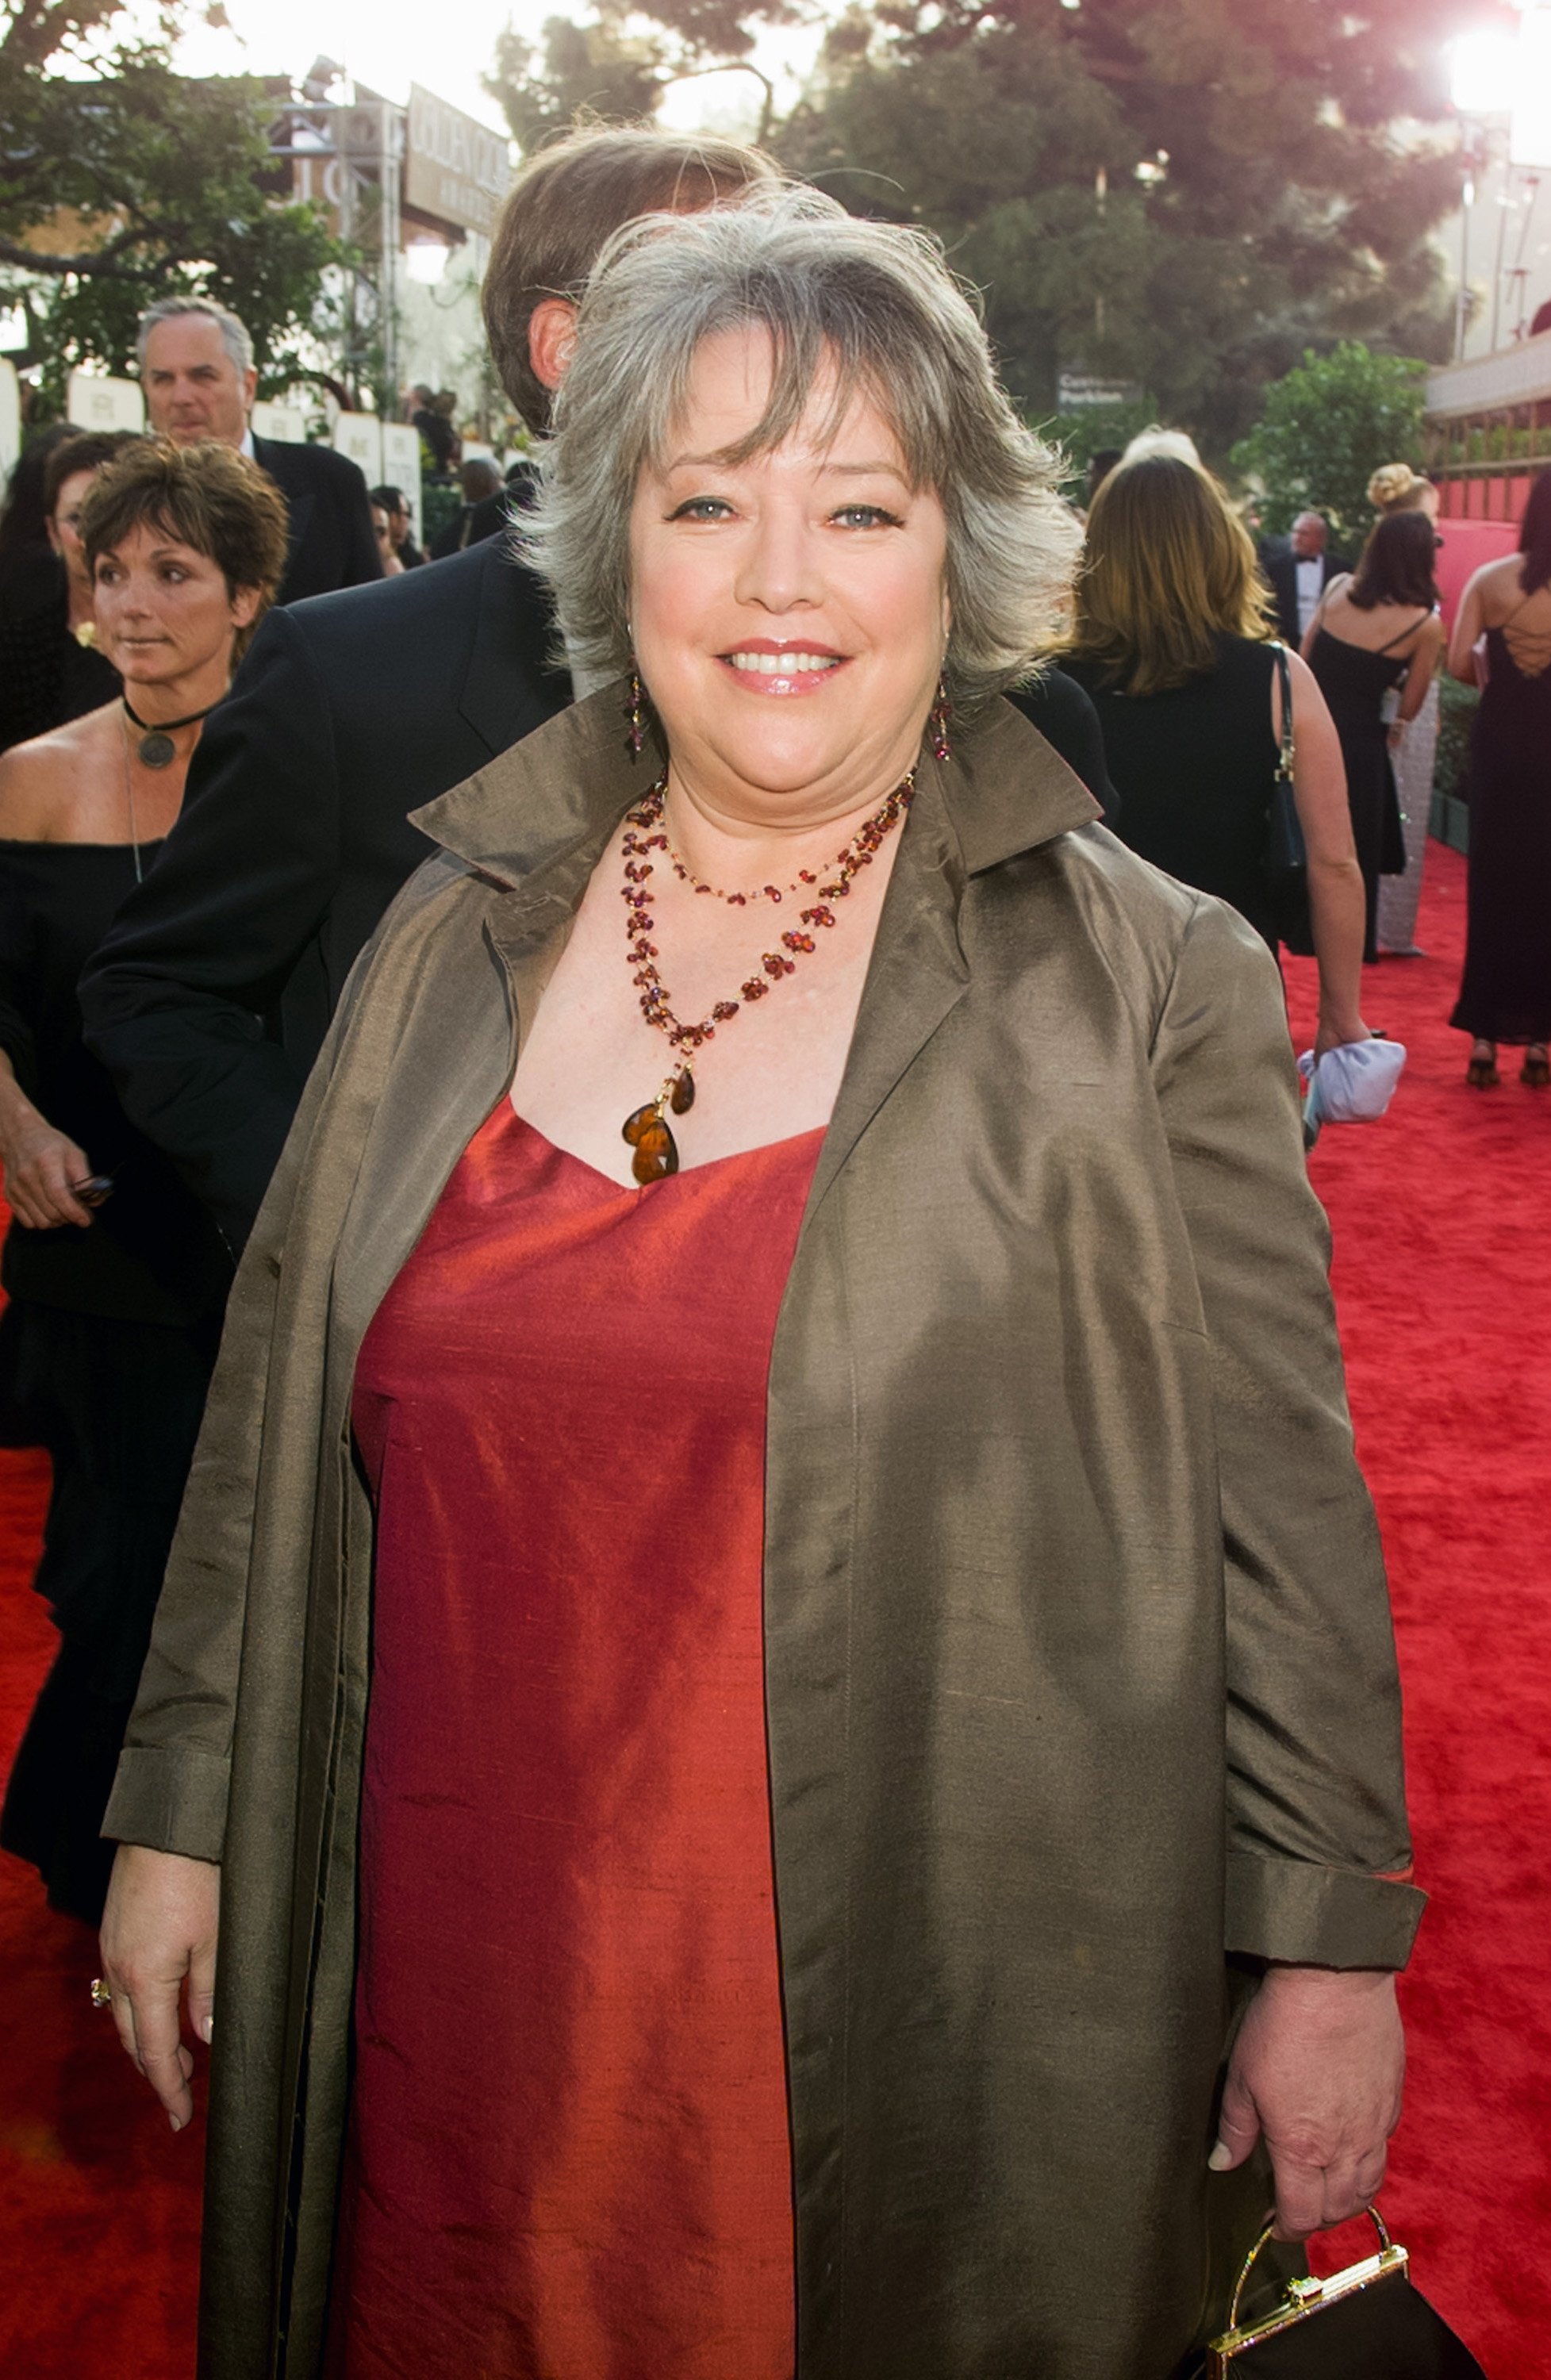 Kathy Bates at the 60th Annual Golden Globe Awards on January 19, 2003, in Beverly Hilton. | Source: Paul Drinkwater/NBCU Photo Bank/NBCUniversal/Getty Images